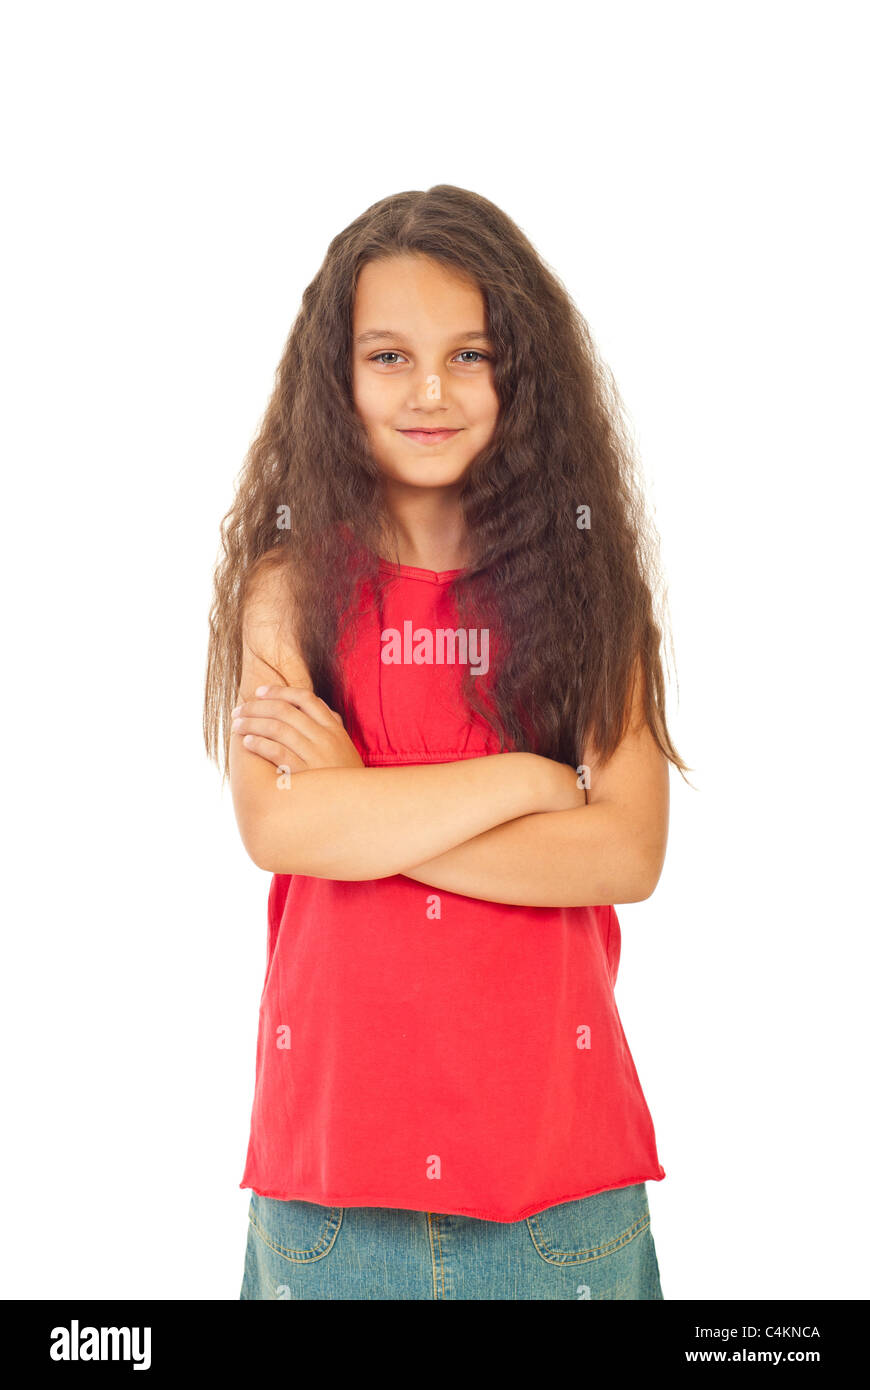 Pretty girl seven years old with long curly hair standing with arms folded isolated on white background Stock Photo